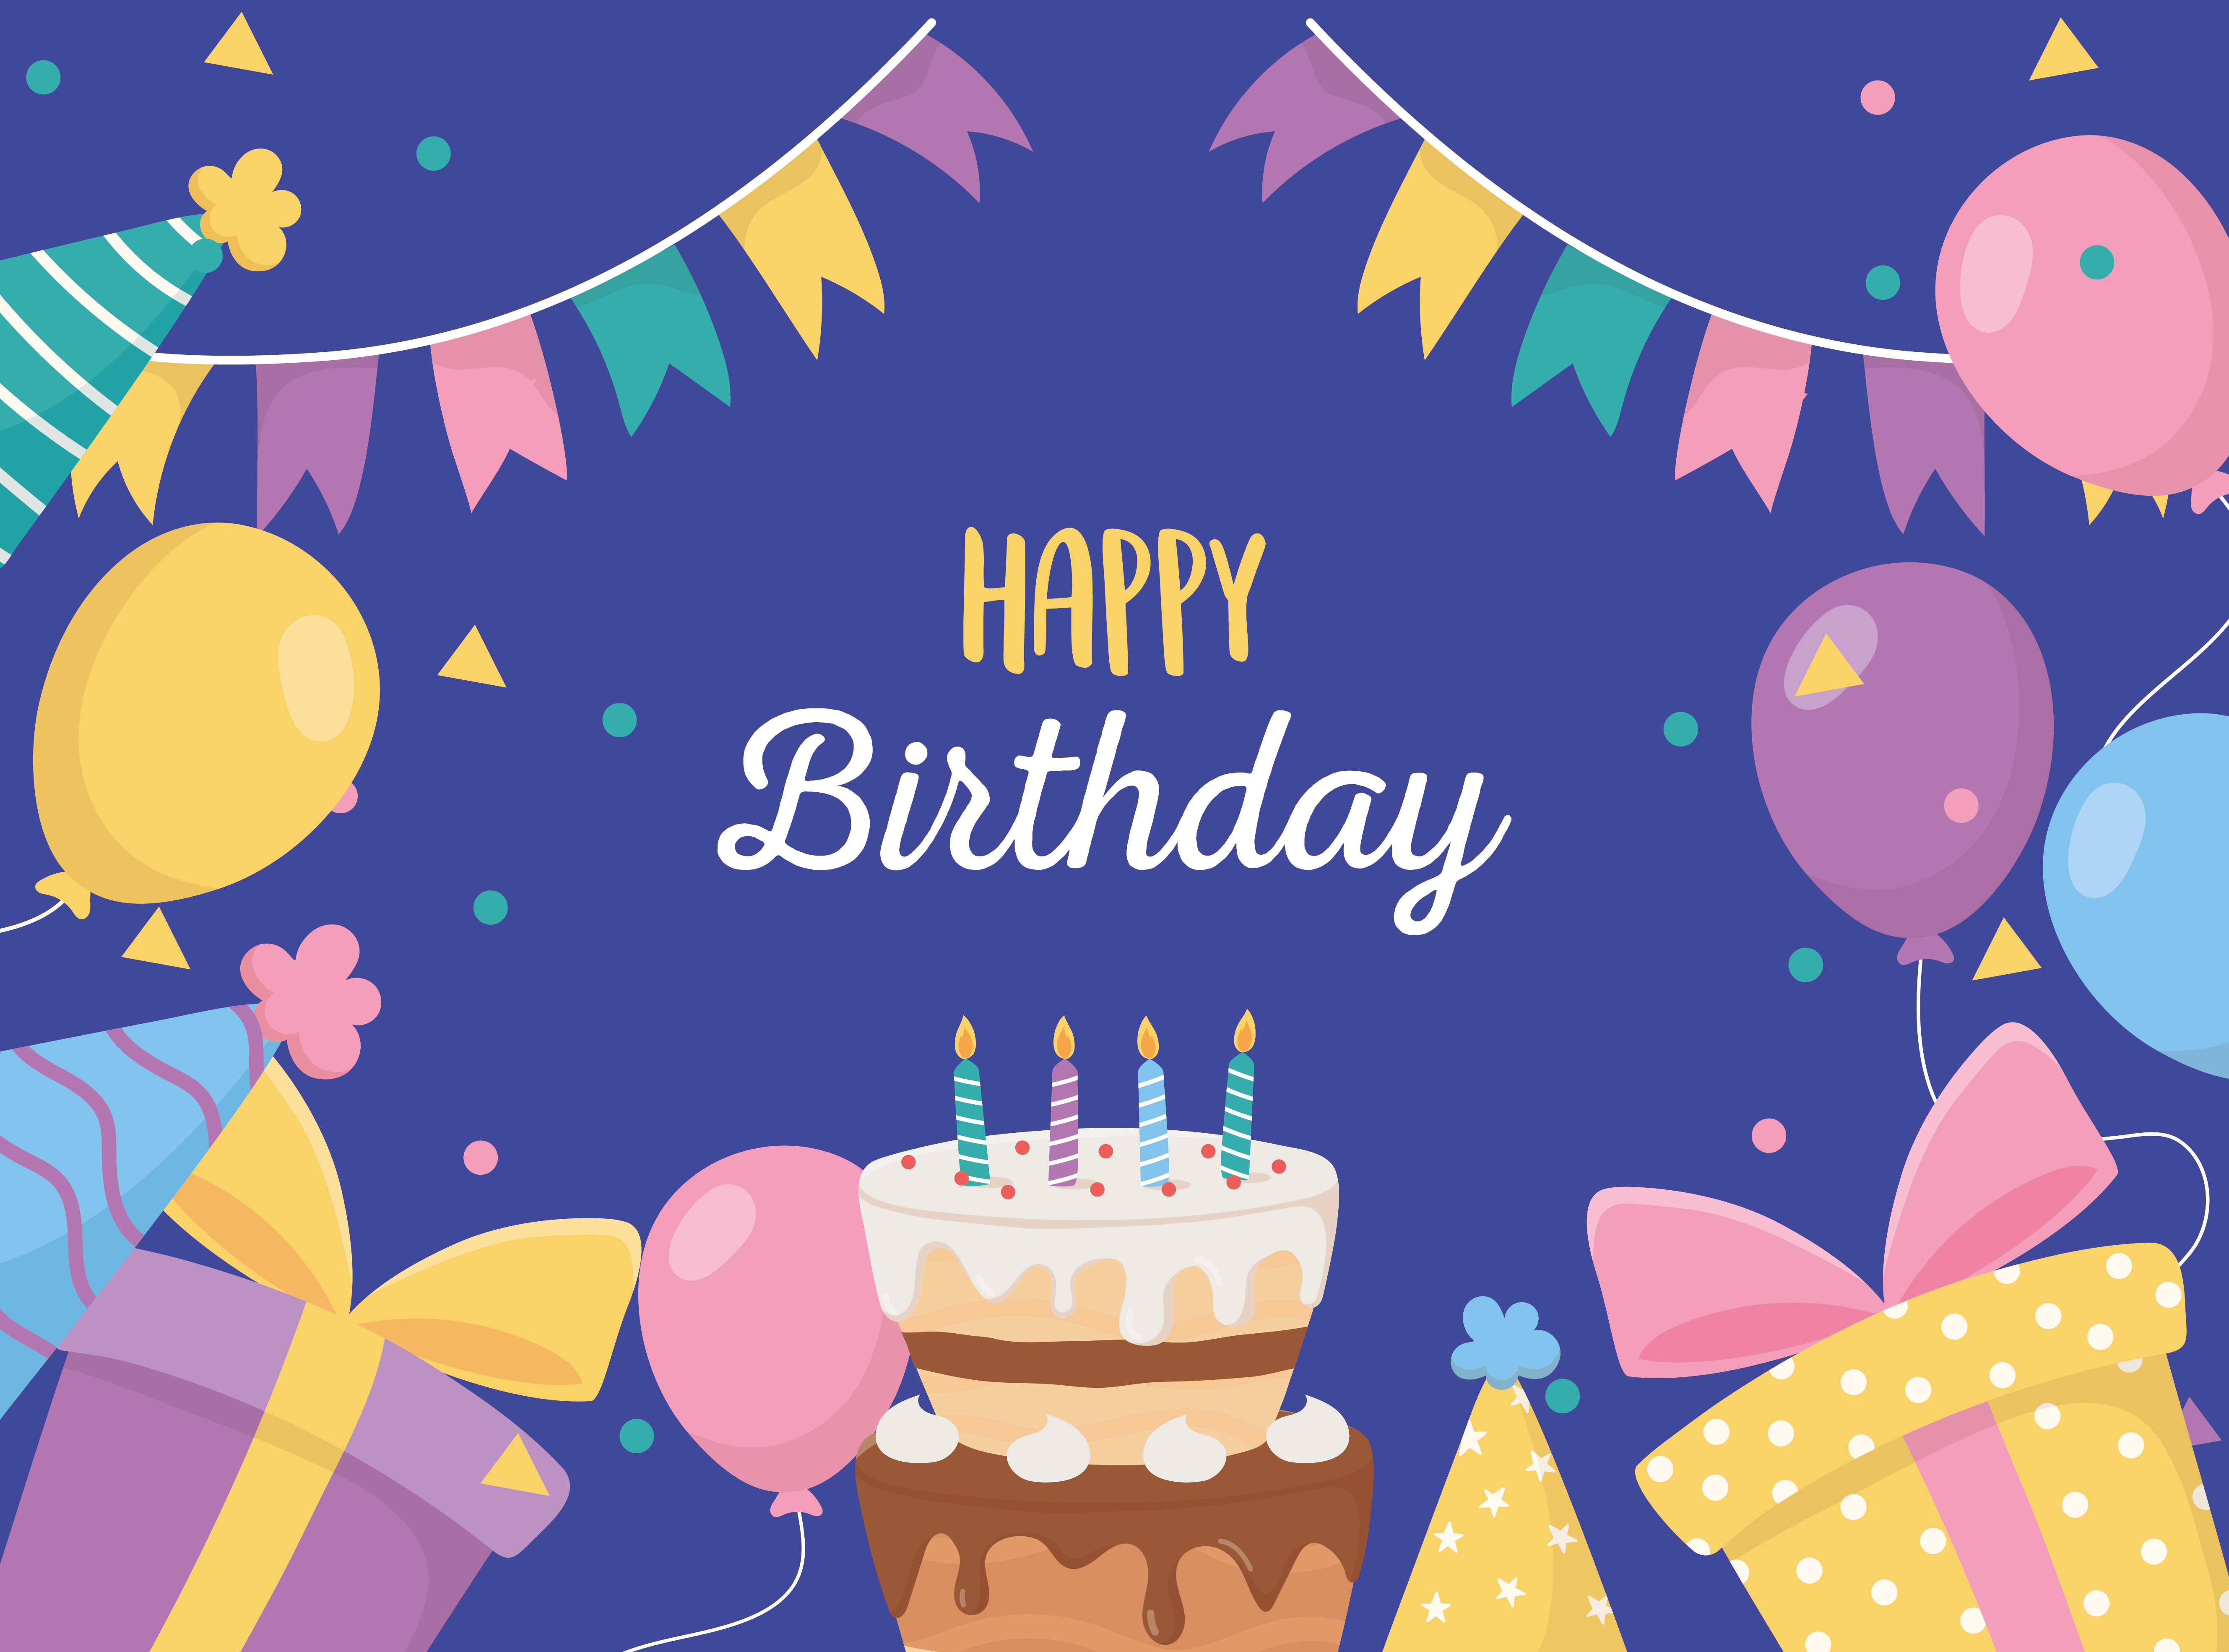 Happy Birthday Cake and Wishes Poster Template | PosterMyWall